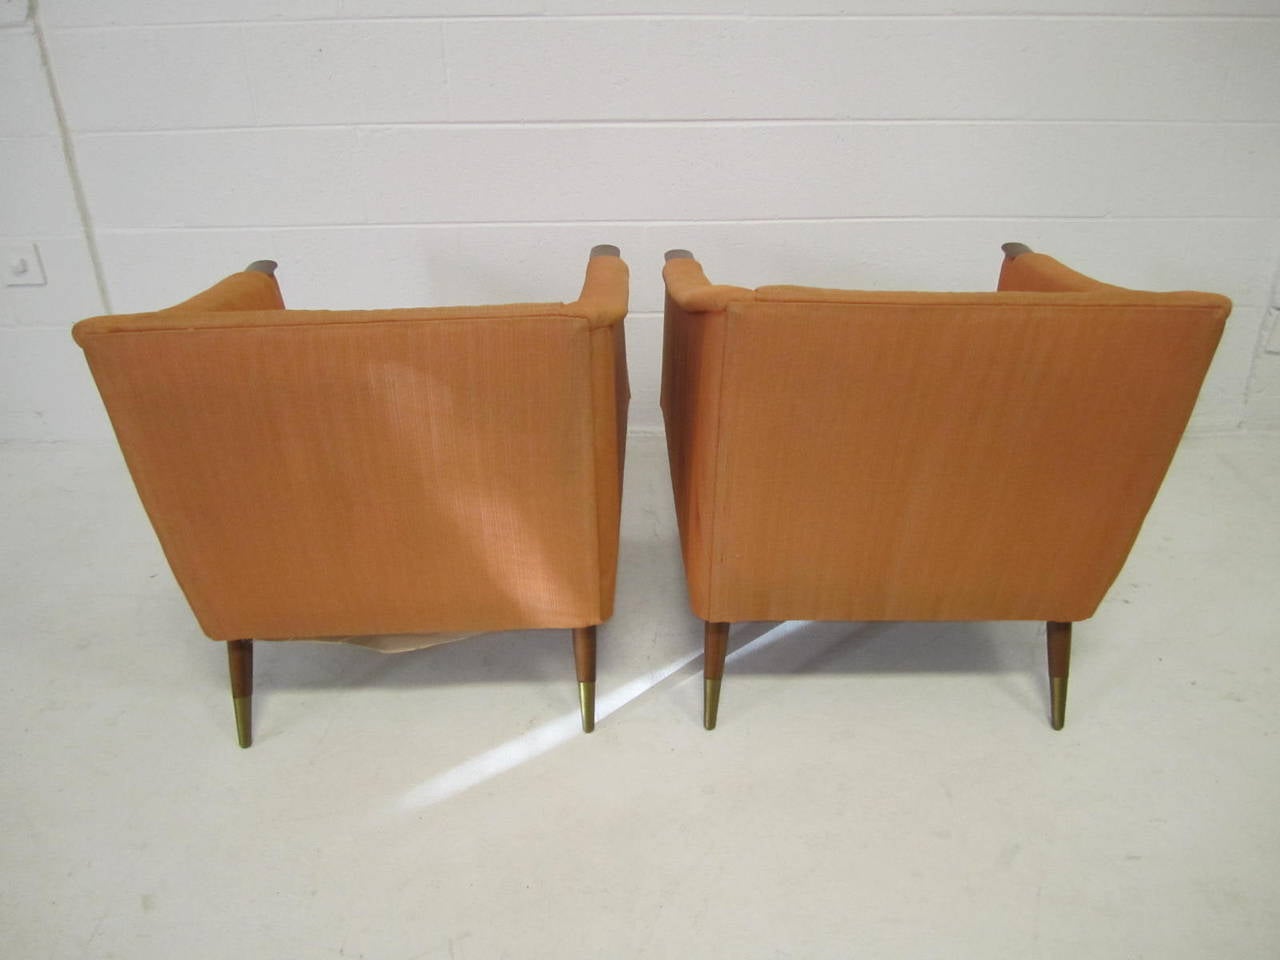 Unusual Pair of Signed Karpen Boxy Lounge Chairs, Mid-Century Modern For Sale 2